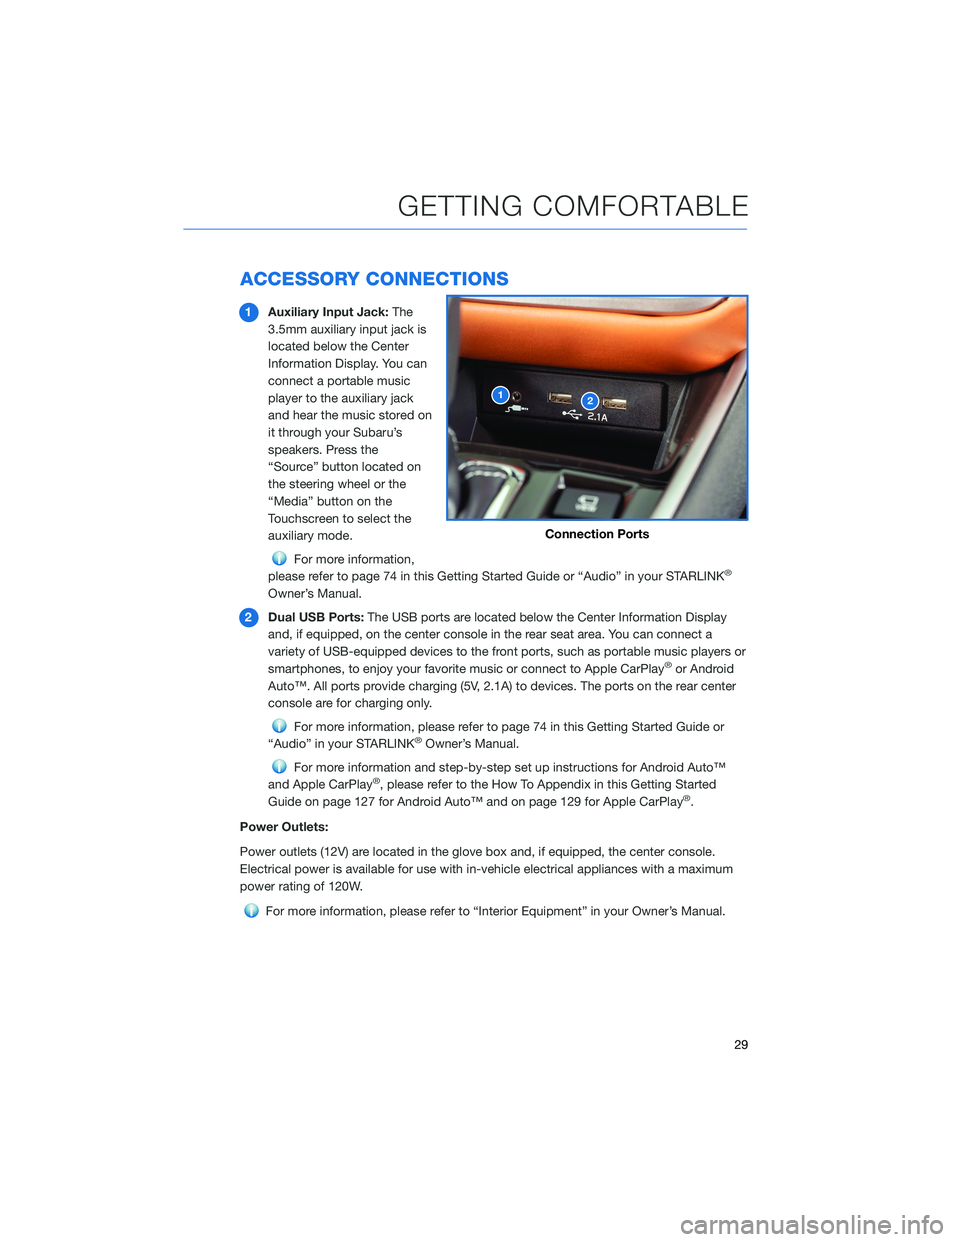 SUBARU LEGACY 2022  Getting Started Guide ACCESSORY CONNECTIONS
1Auxiliary Input Jack:The
3.5mm auxiliary input jack is
located below the Center
Information Display. You can
connect a portable music
player to the auxiliary jack
and hear the m